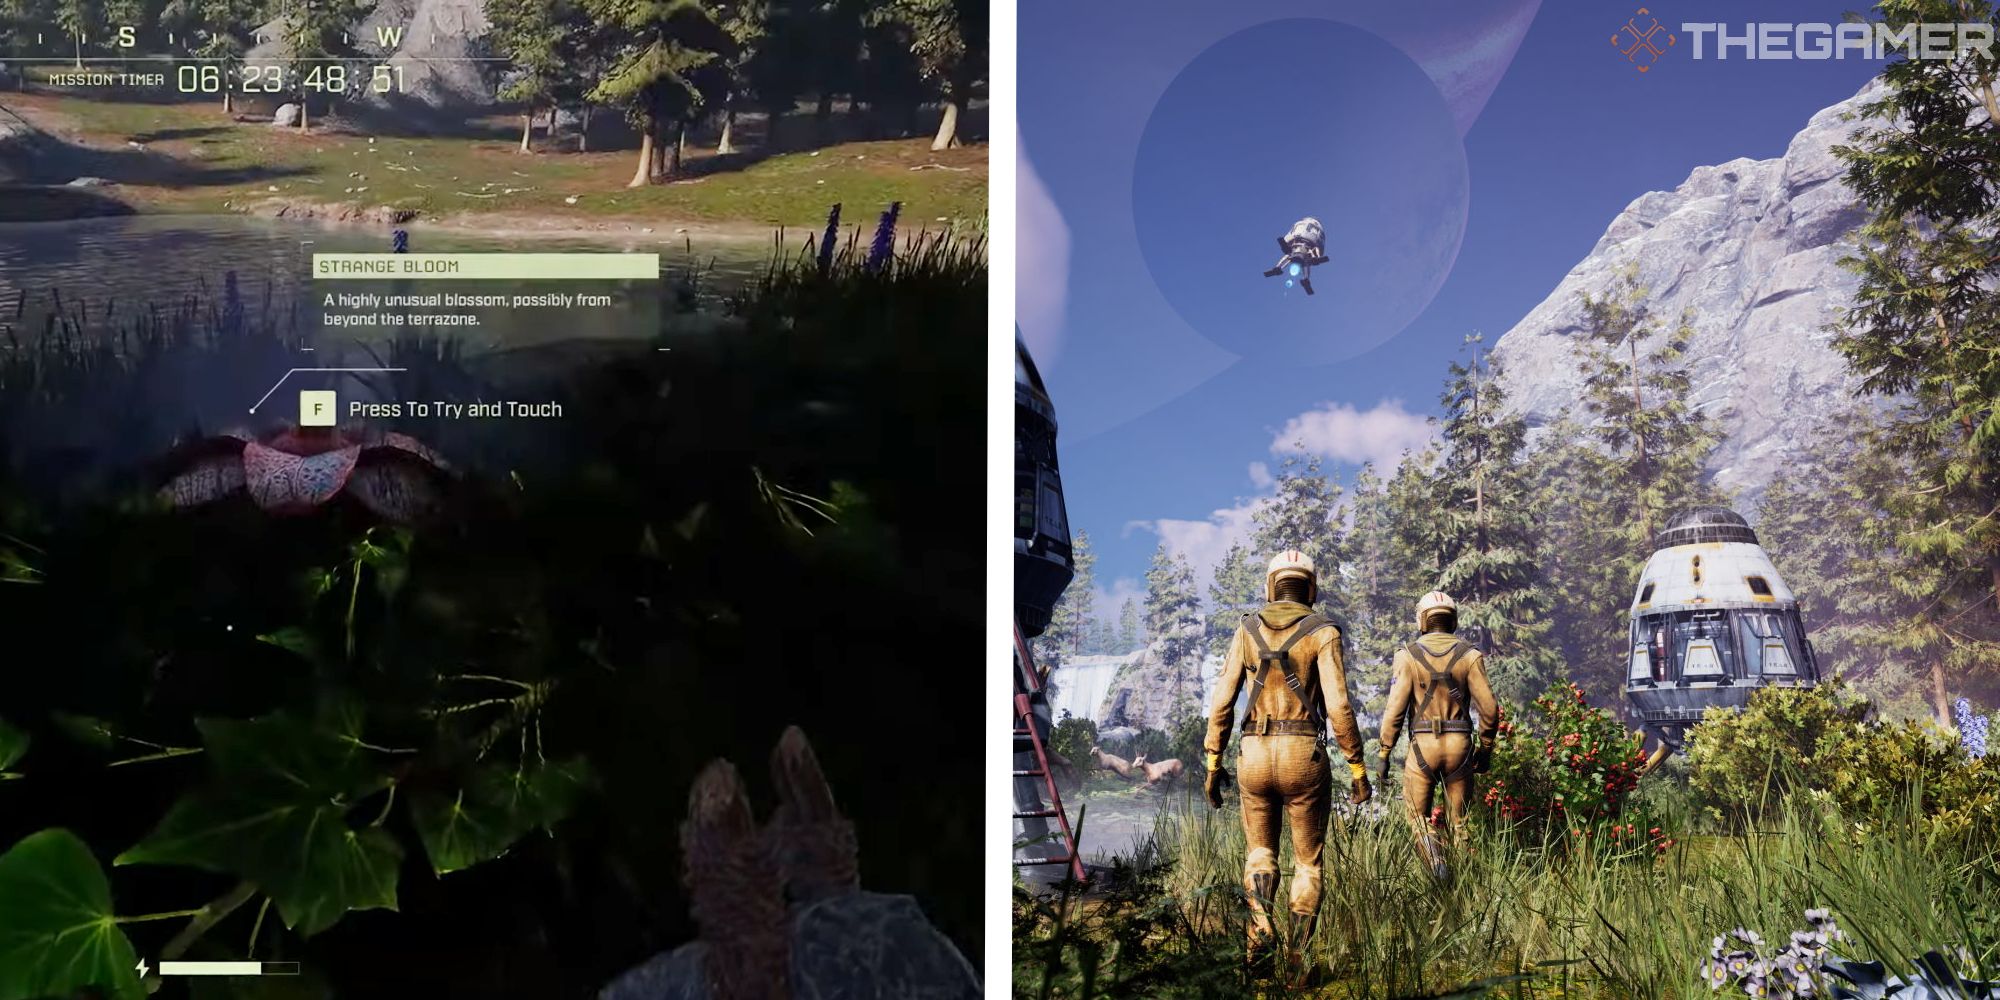 image of strange bloom next to image of players near dropship